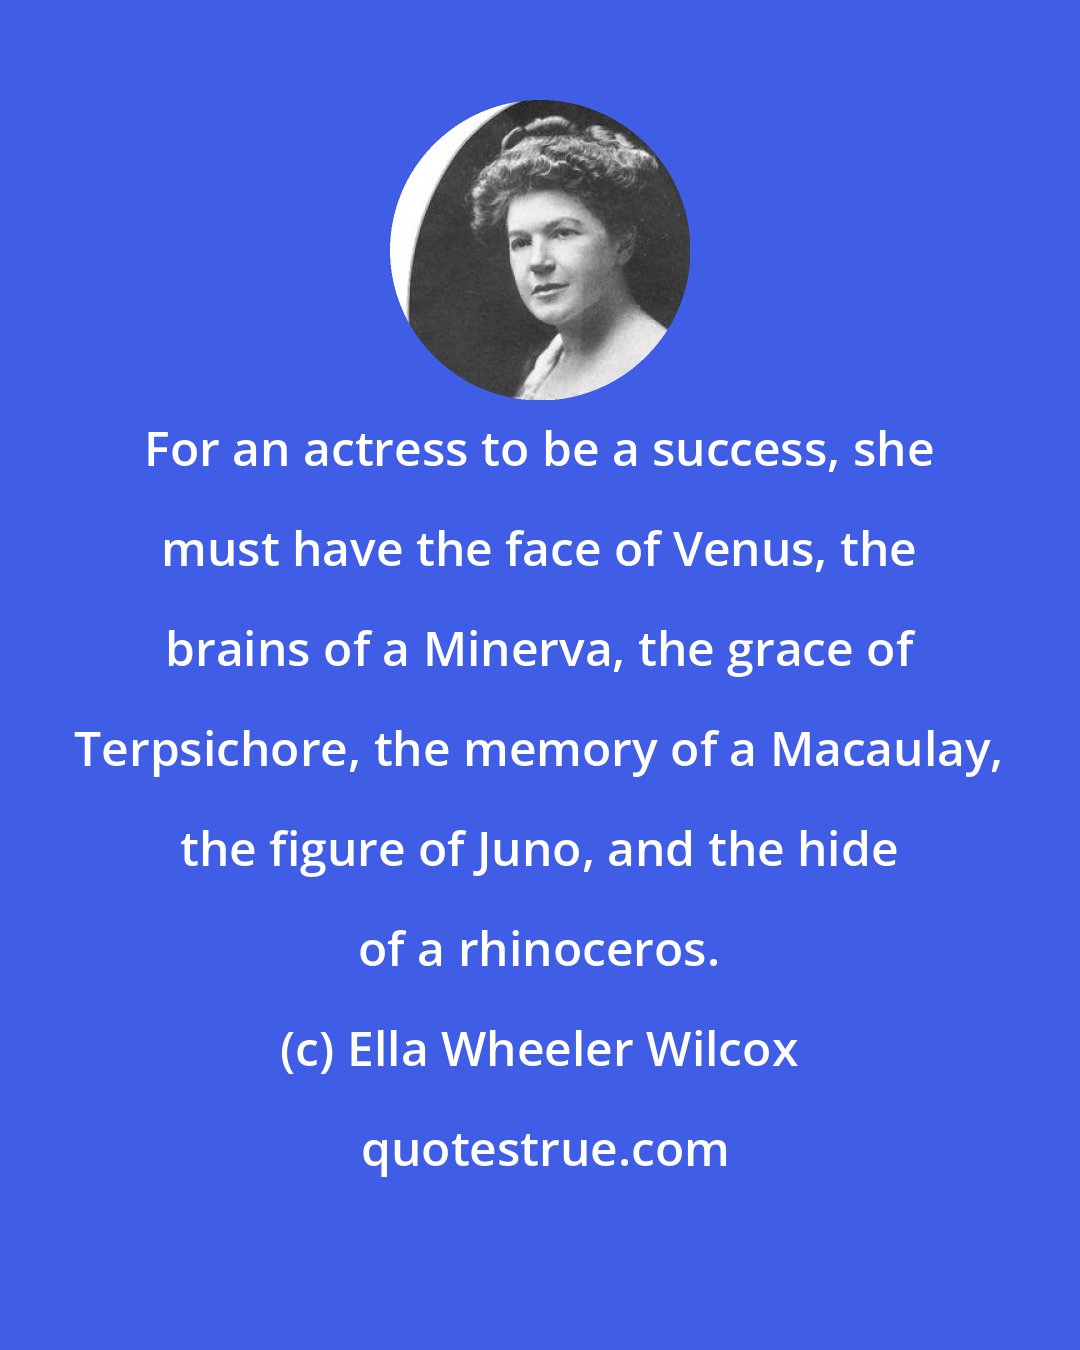 Ella Wheeler Wilcox: For an actress to be a success, she must have the face of Venus, the brains of a Minerva, the grace of Terpsichore, the memory of a Macaulay, the figure of Juno, and the hide of a rhinoceros.